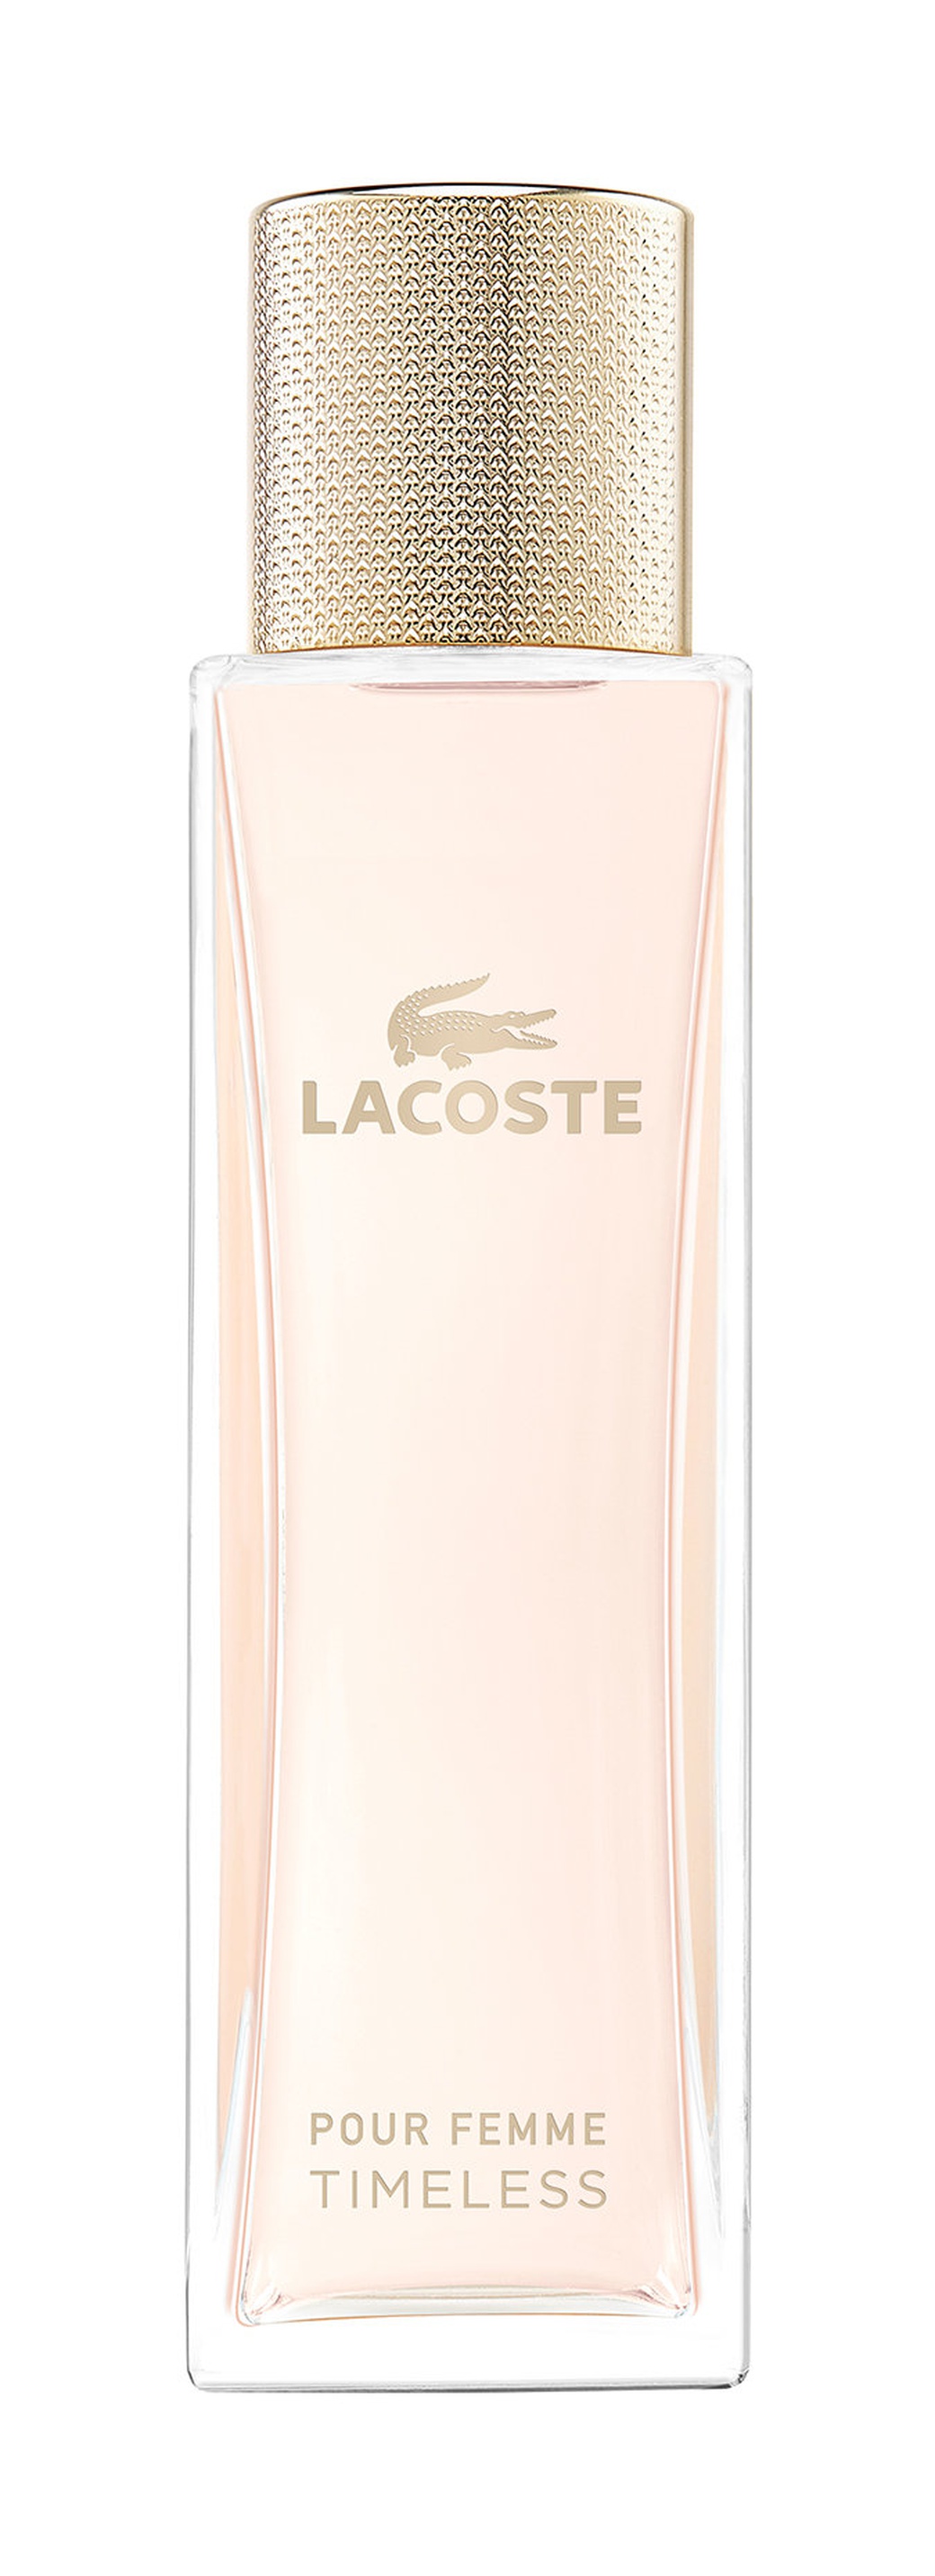 Парфюмерная вода Lacoste Pour Femme Timeless W Edp 50 ml фото